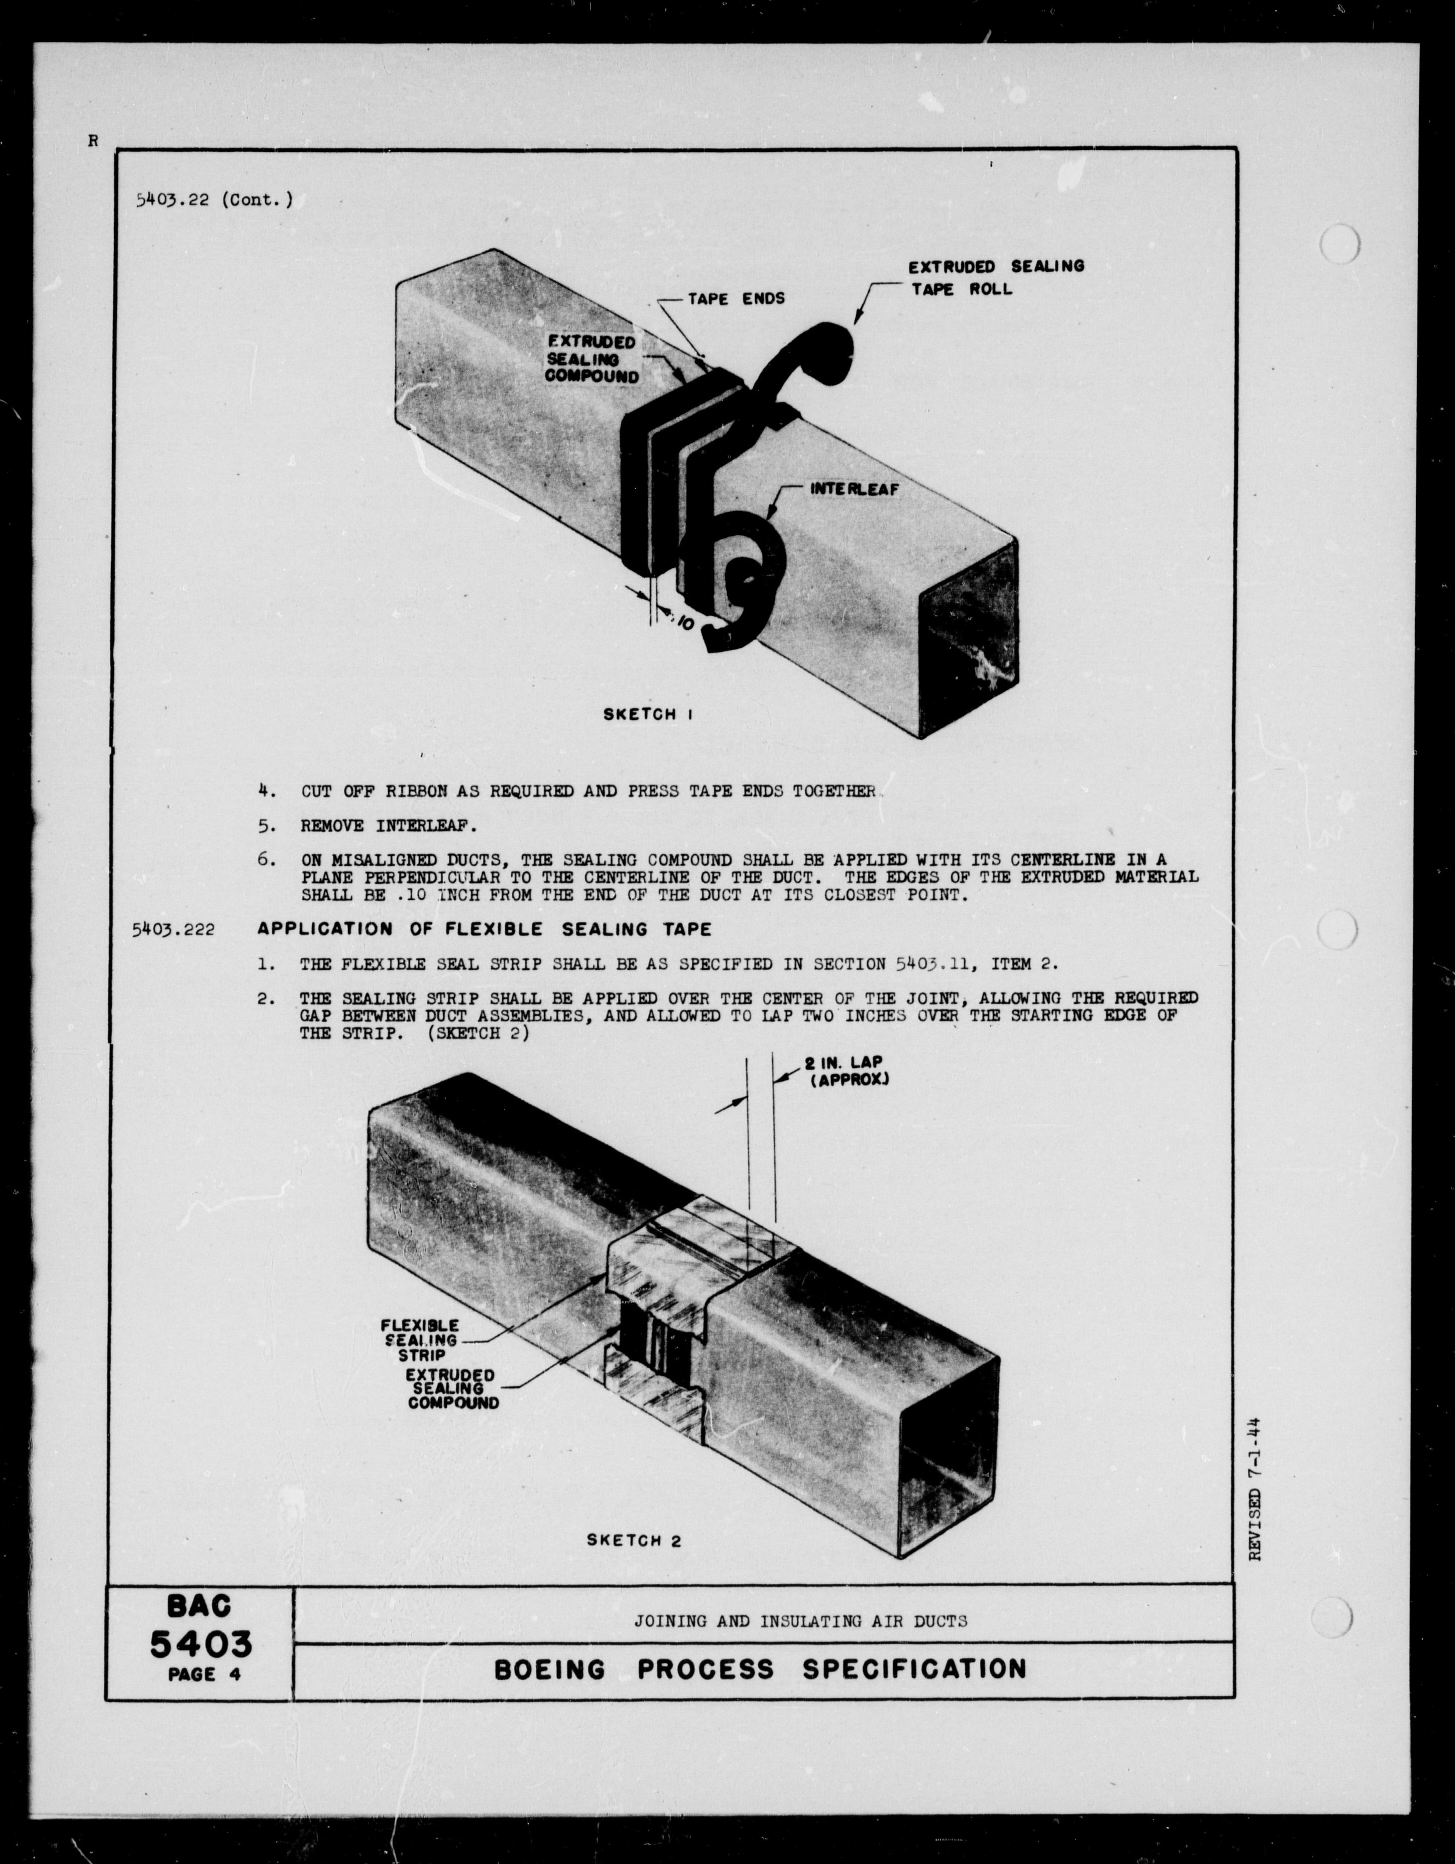 Sample page 4 from AirCorps Library document: Joining and Insulating Air Ducts